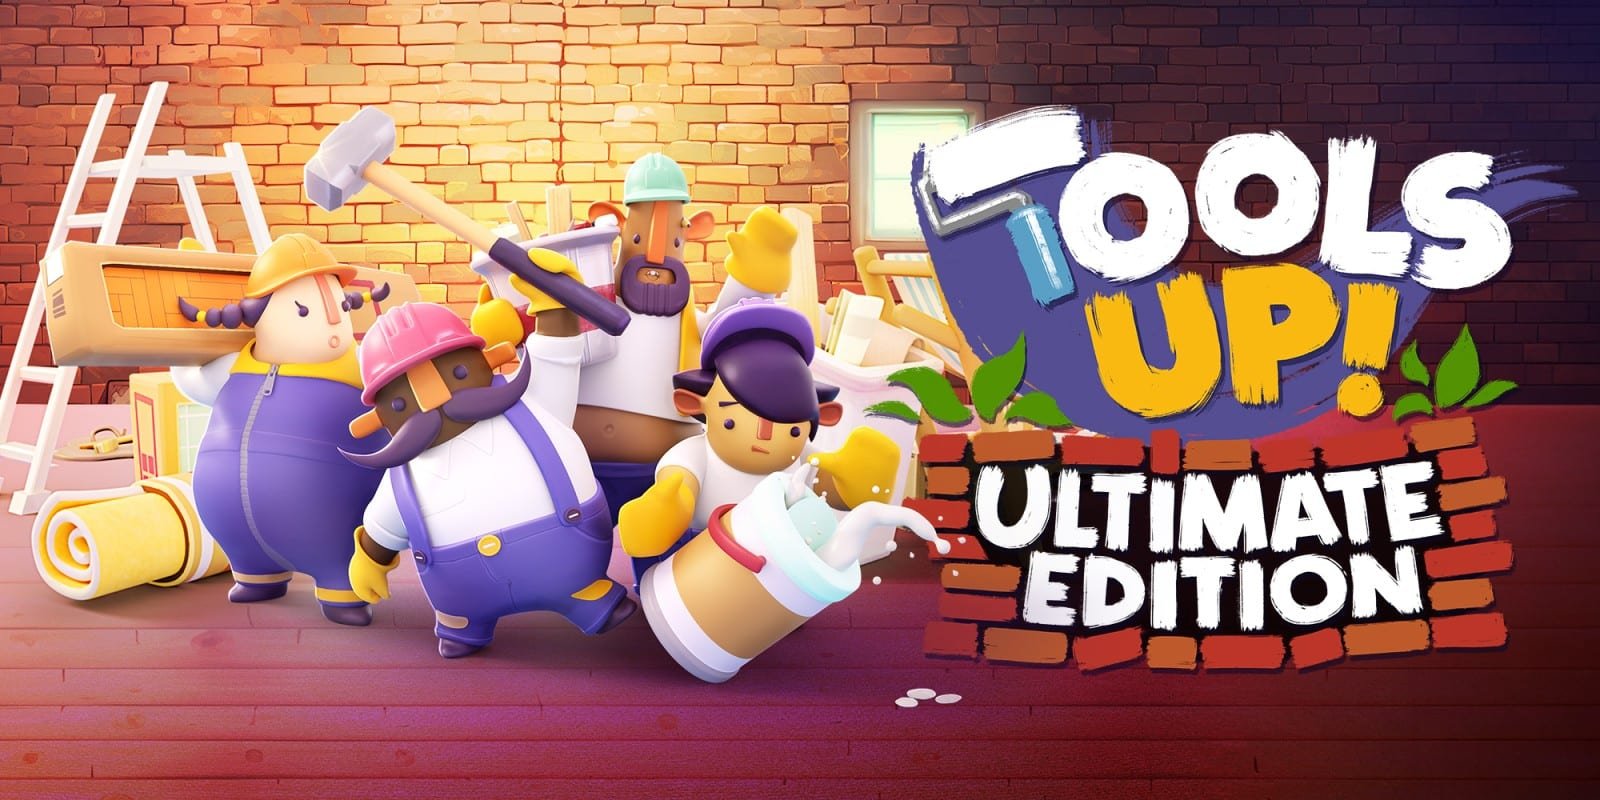 Tools Up! Ultimate Edtion sort aujourd’hui sur Nintendo Switch